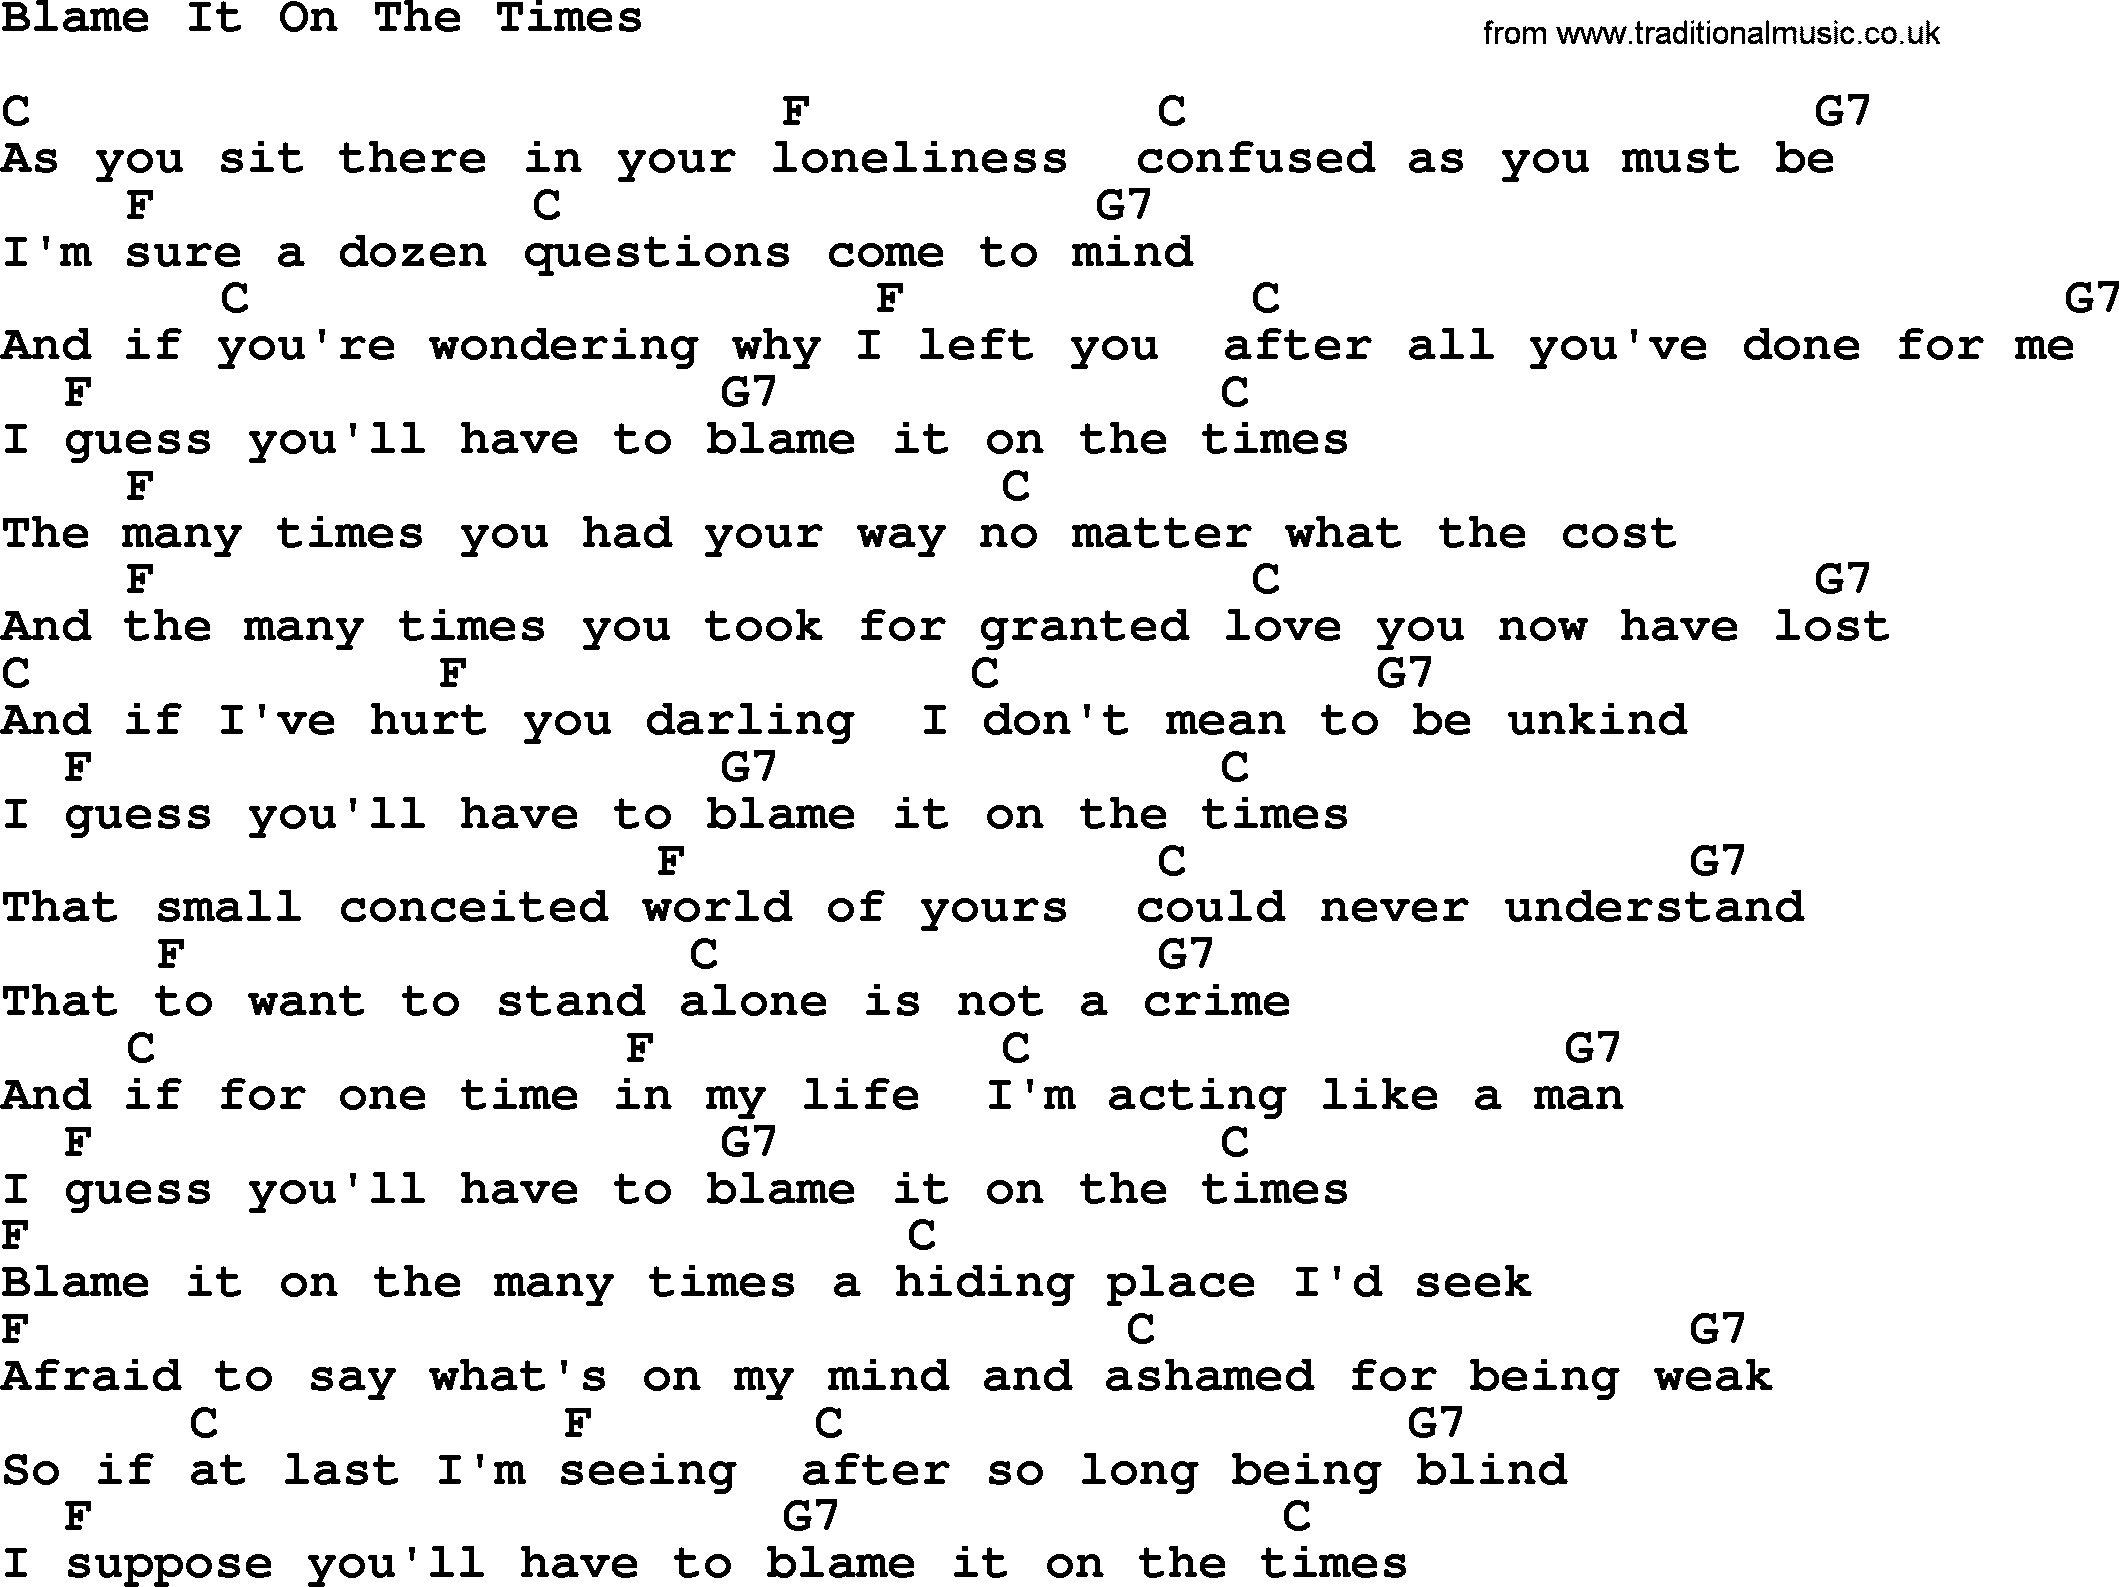 Willie Nelson song: Blame It On The Times, lyrics and chords